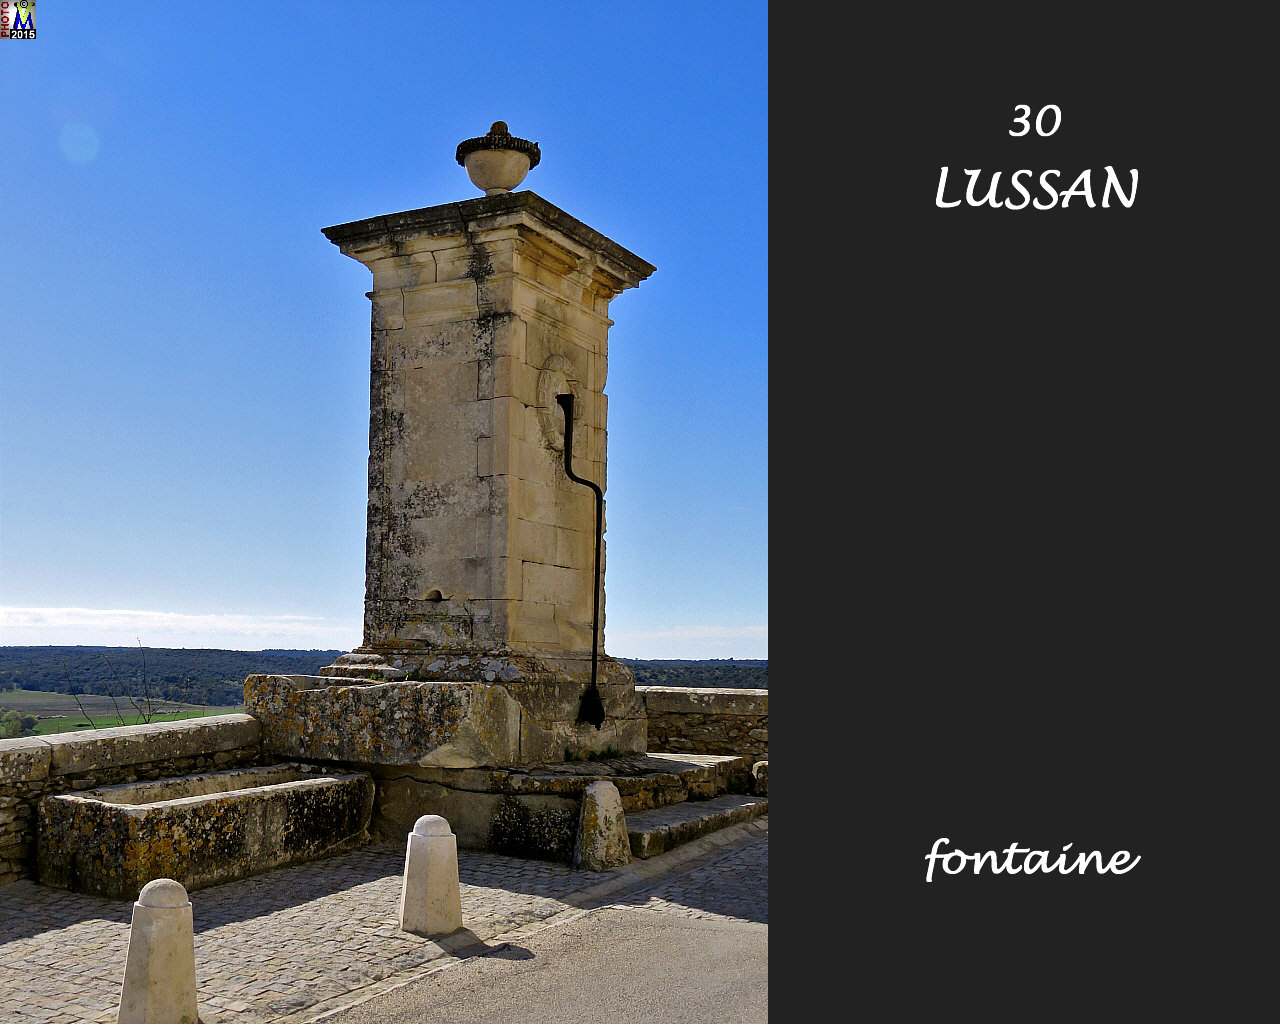 30LUSSAN_fontaine_102.jpg